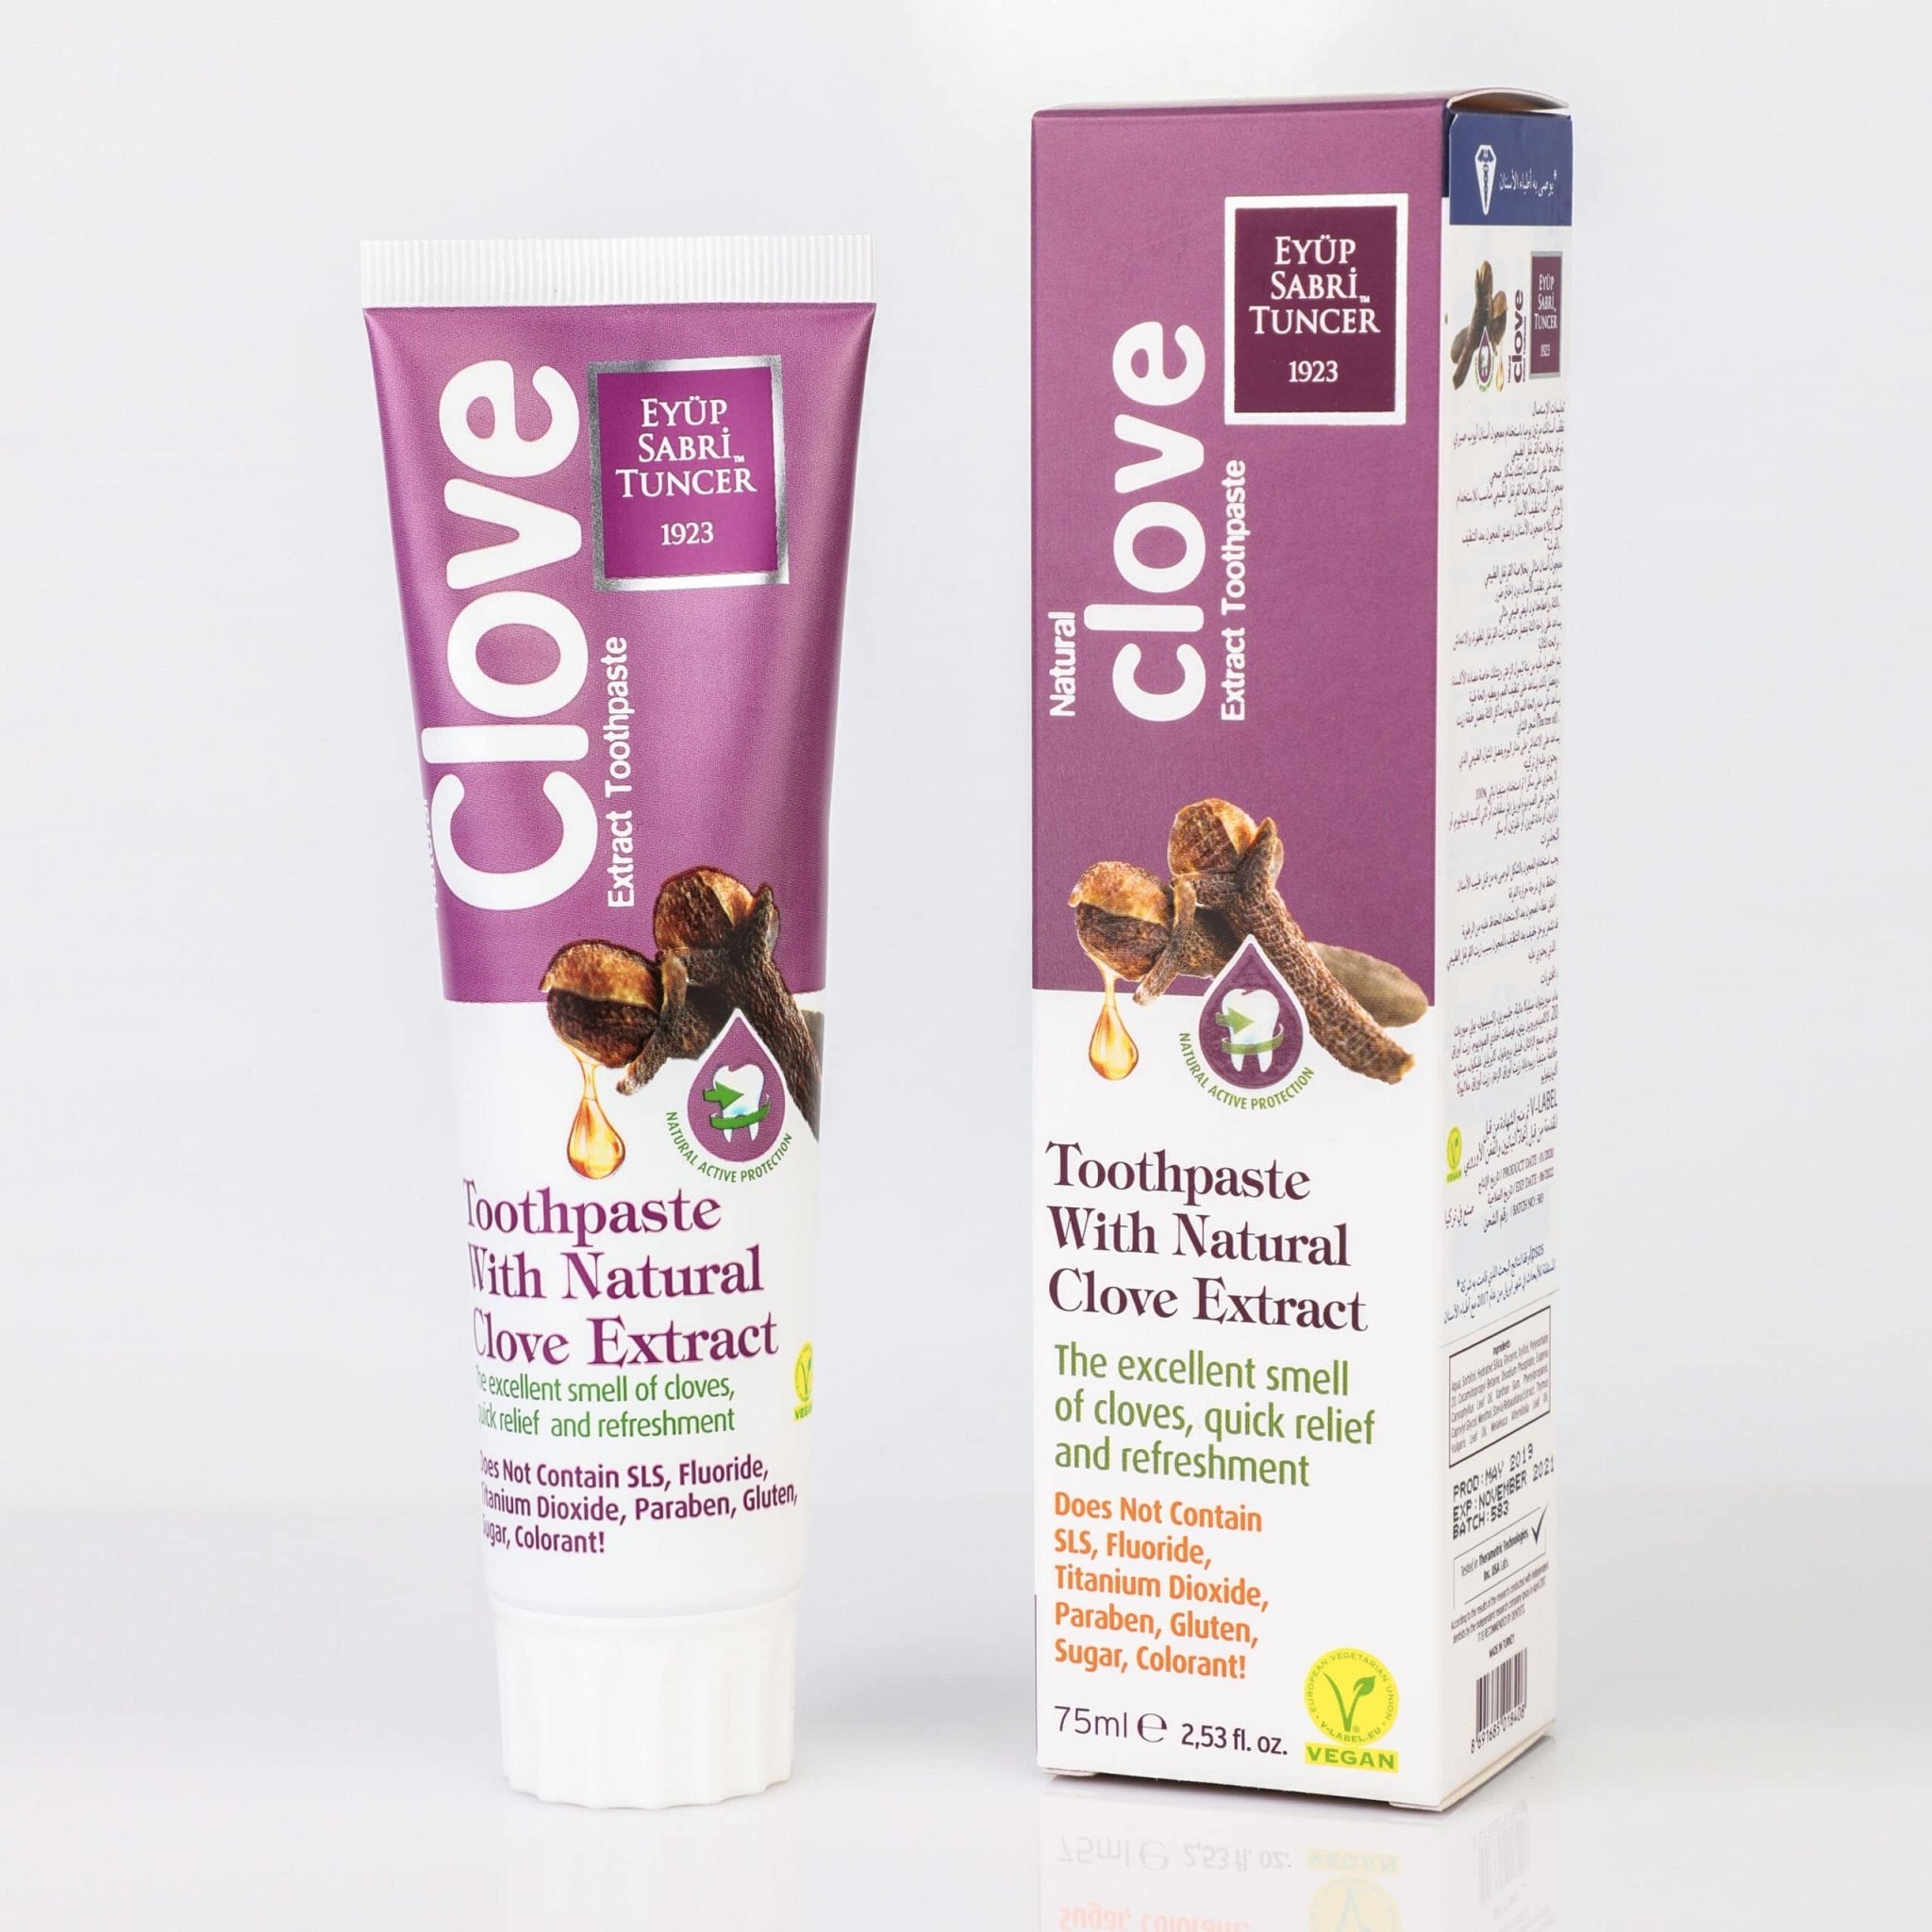 Eyup Sabri Tuncer Toothpaste with Natural Clove Extract - Aytac Foods